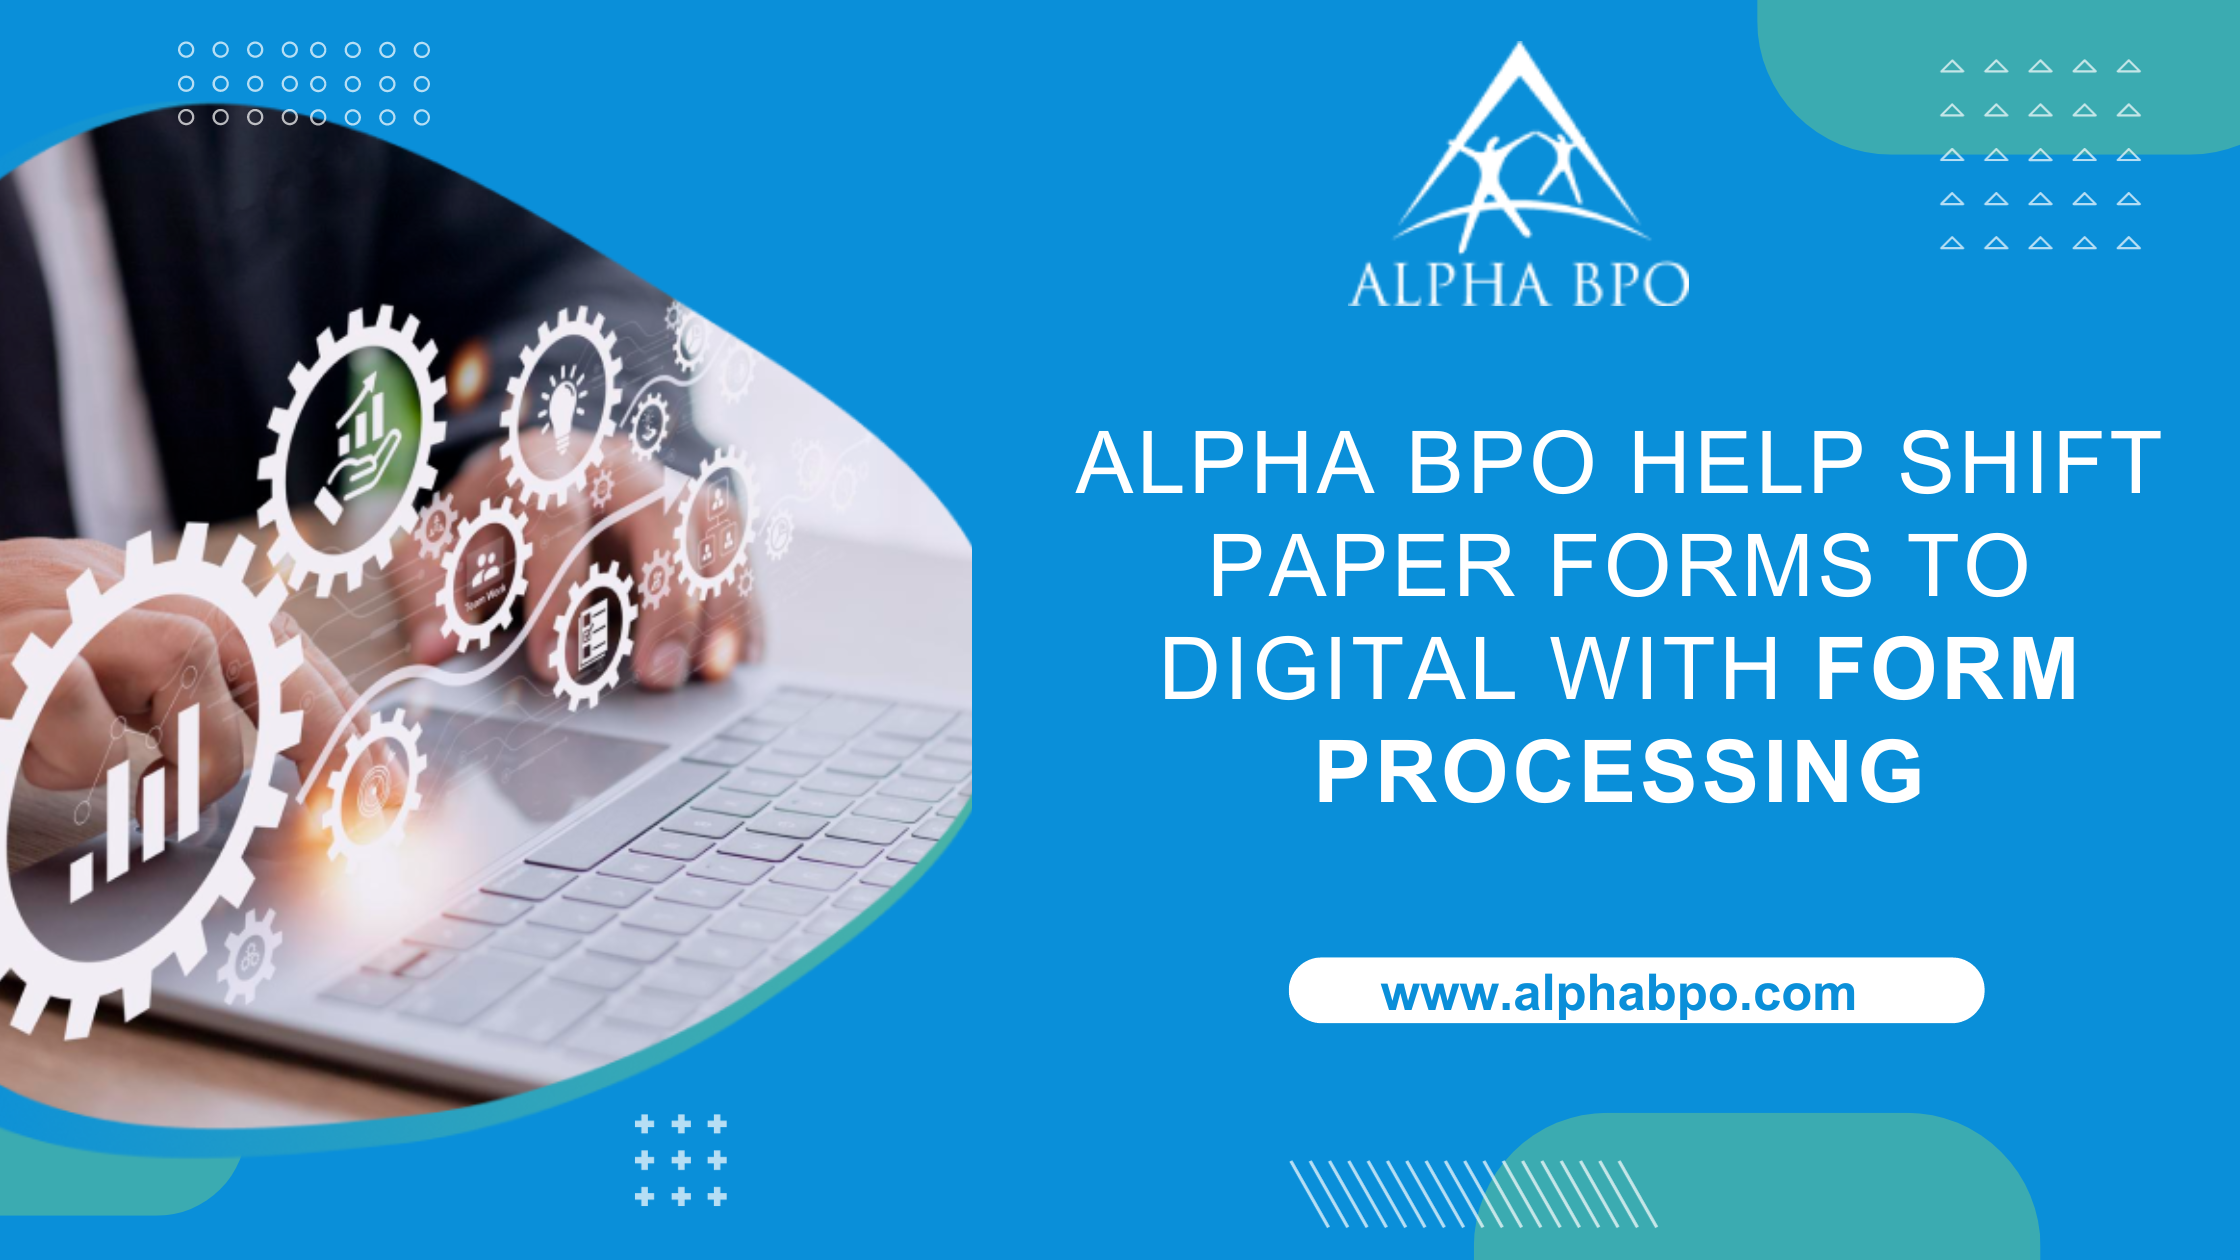 Alpha BPO Help Shift Paper Forms to Digital with Form Processing